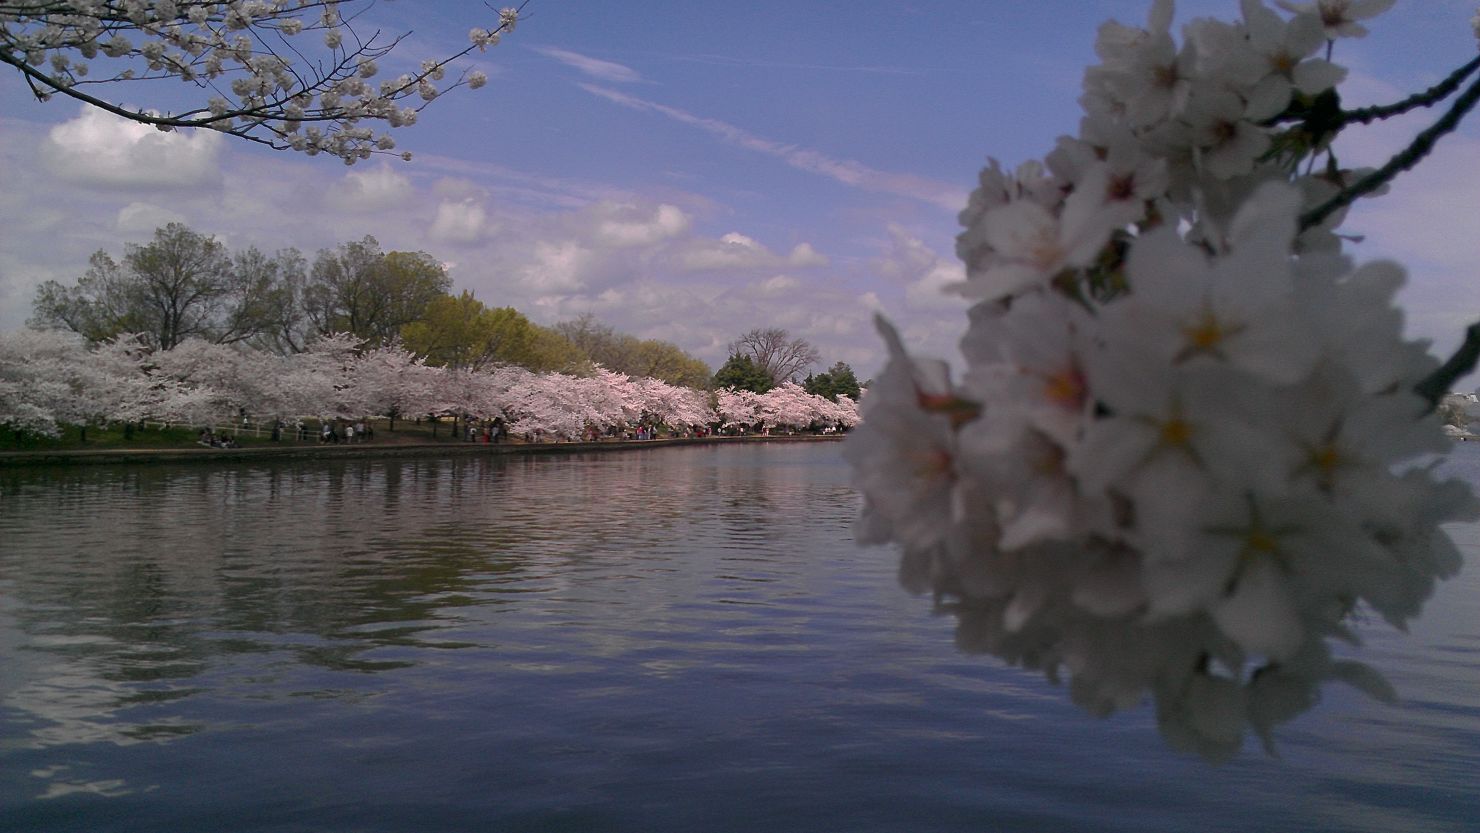 Last year, Washington's cherry trees blossomed early; this year, the political climate warmed first, says Ira Shapiro.